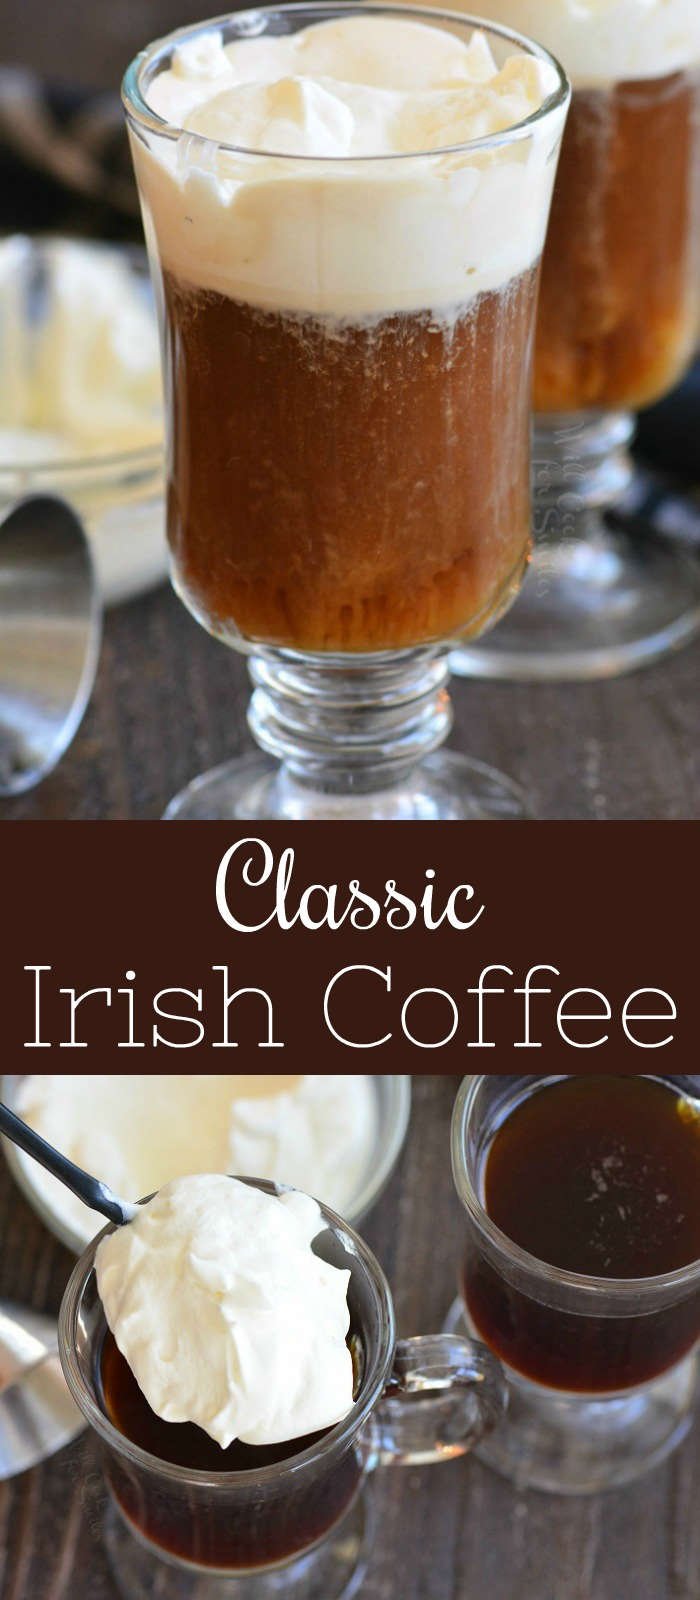 collage of Irish coffee up close and adding whipped cream.